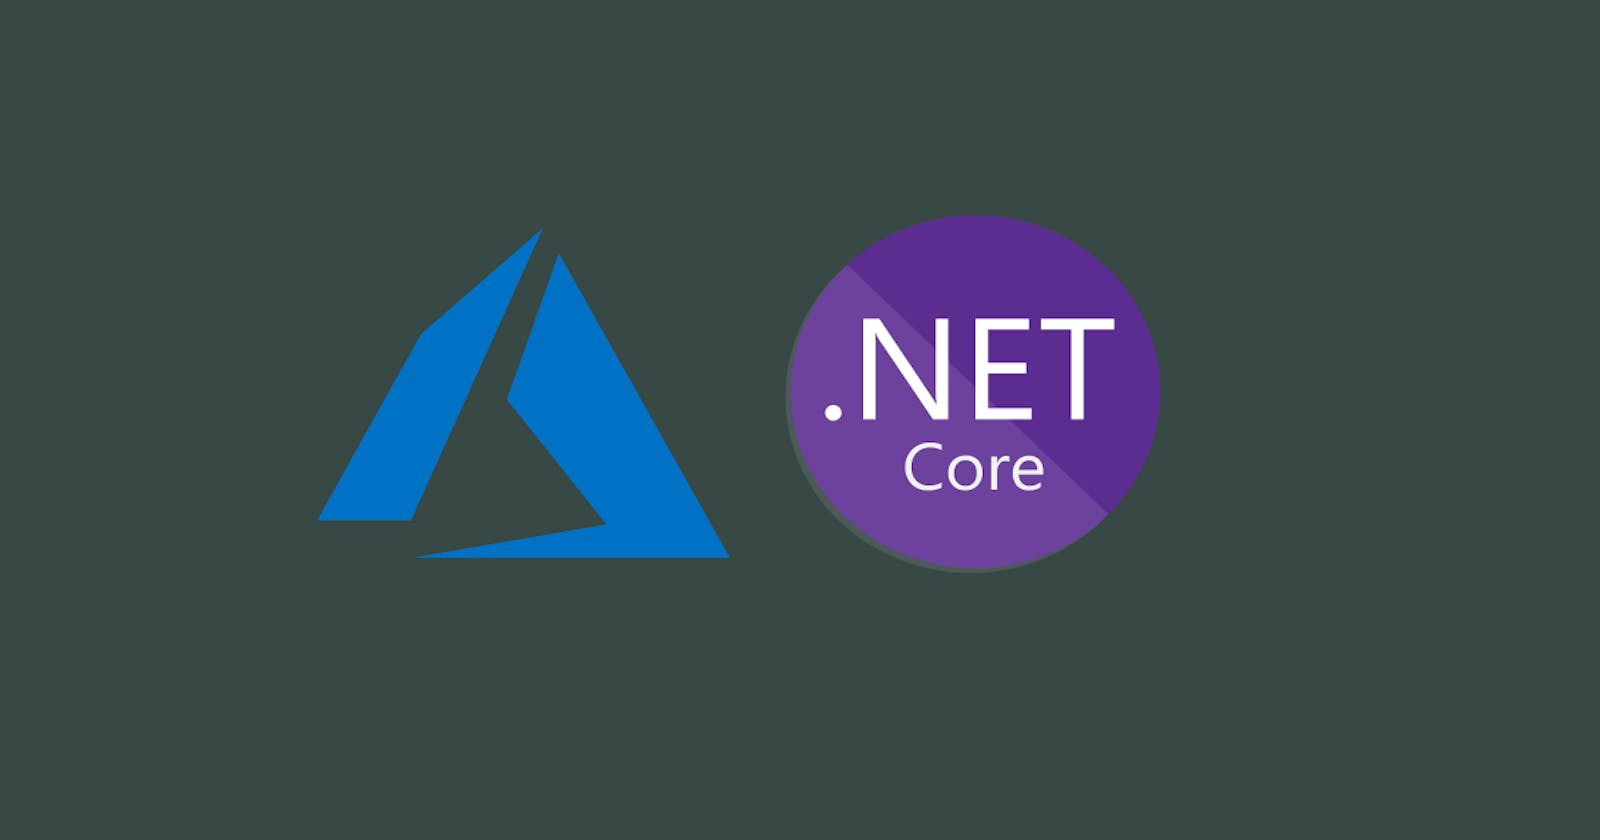 How to setup Azure App Configuration and Key Vault in a .Net Core project